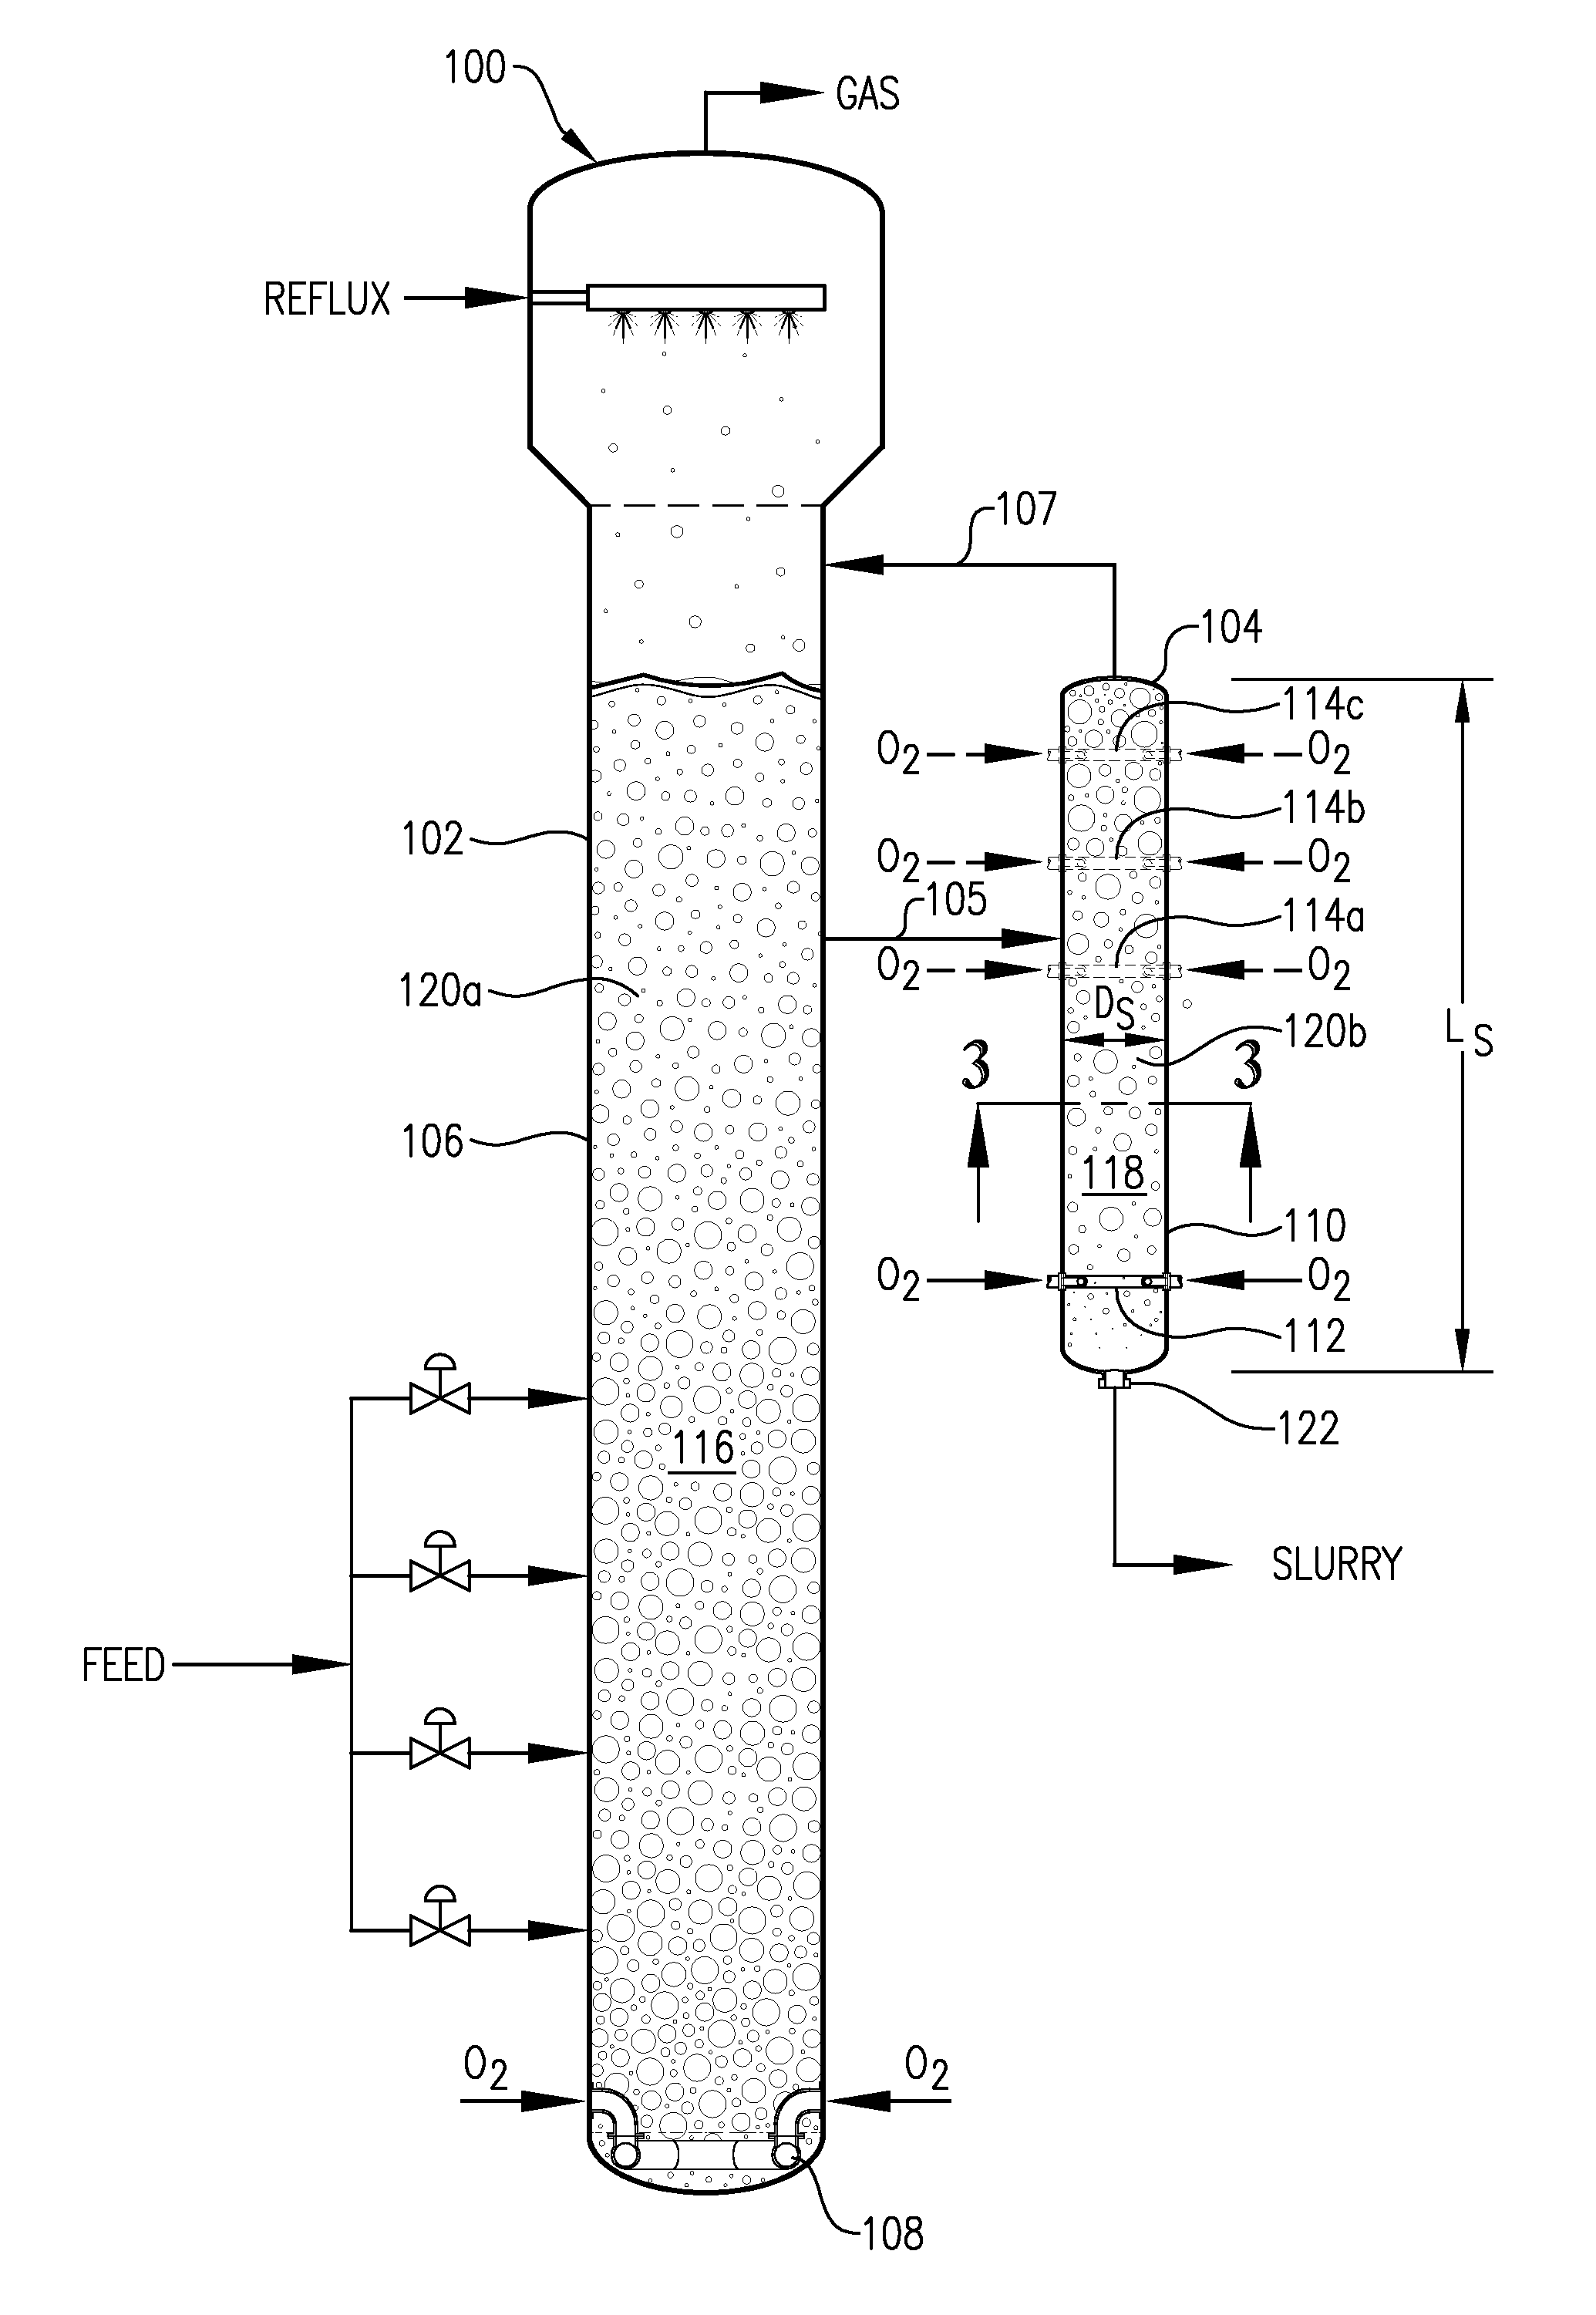 Oxidation system with sidedraw secondary reactor